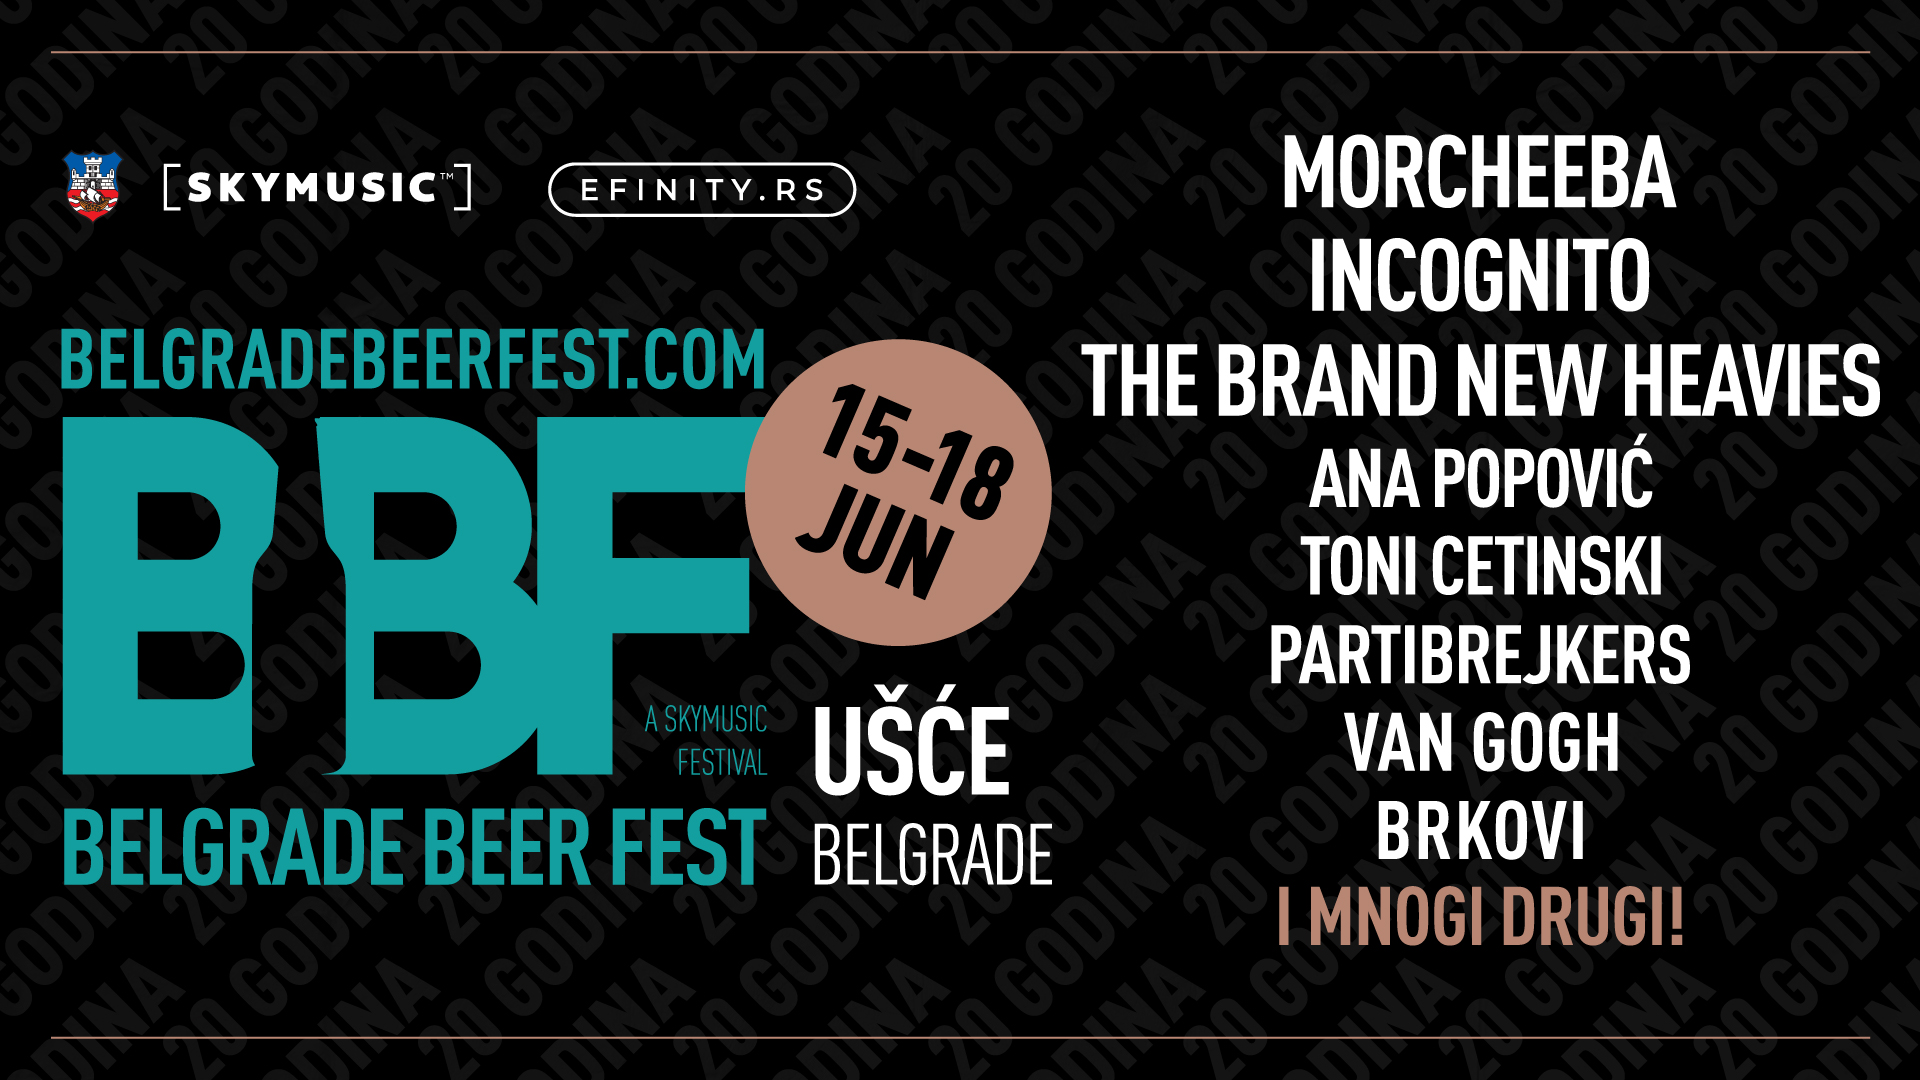 Belgrade Beer Fest: Morcheeba is joined by The Brand New Heavies, Incognito, Partibrejkers, Toni Cetinski, Brkovi and many others